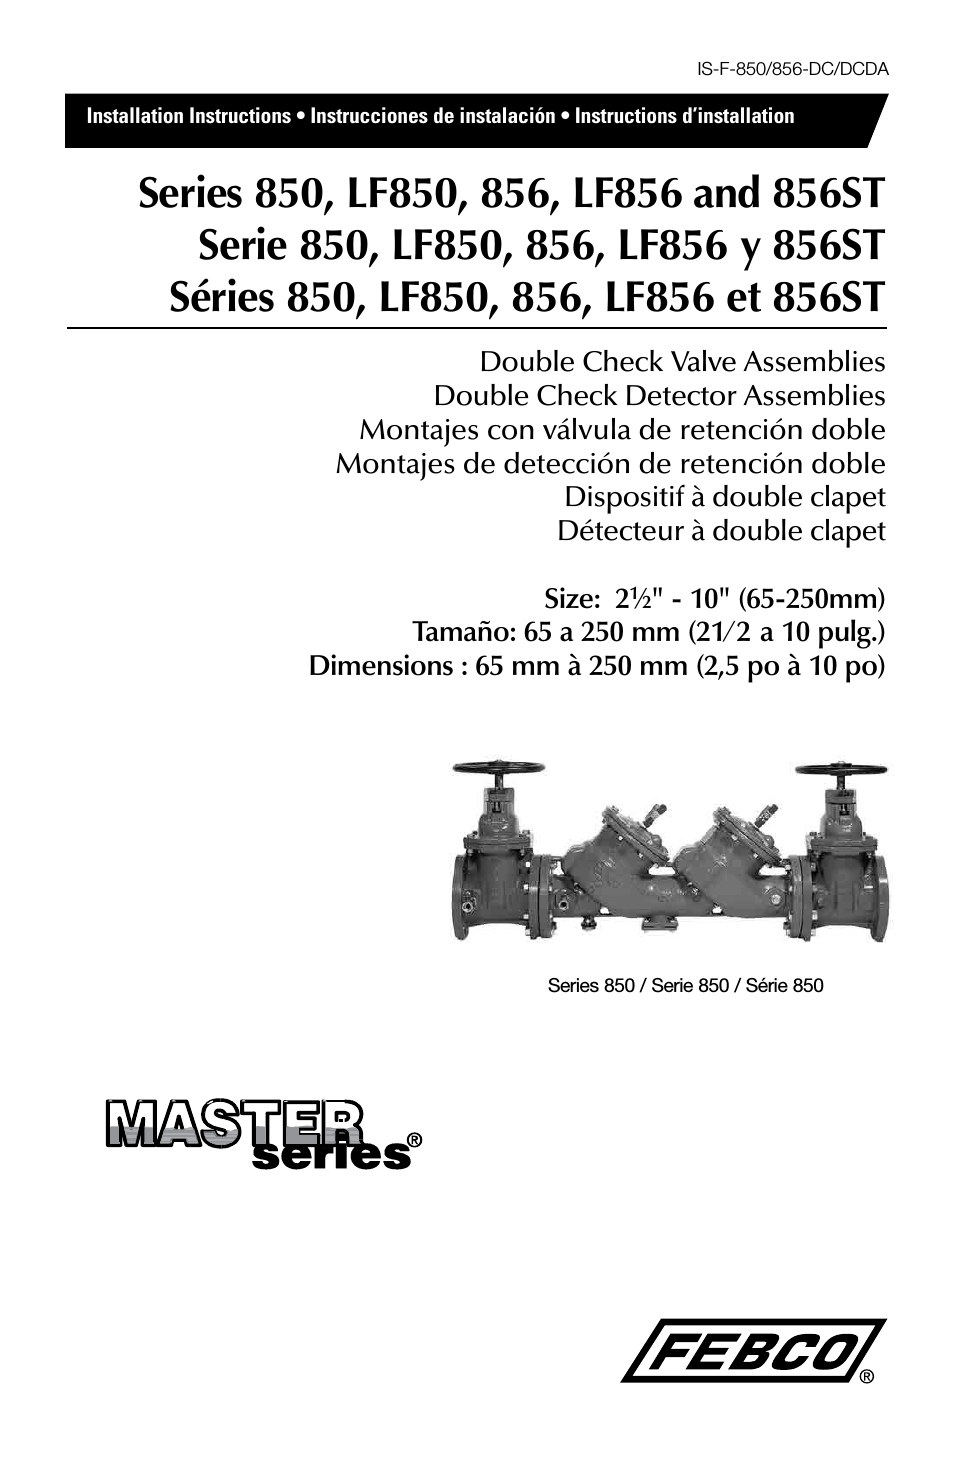 856ST MasterSeries In-Line Design Double Check Detector Assemblies